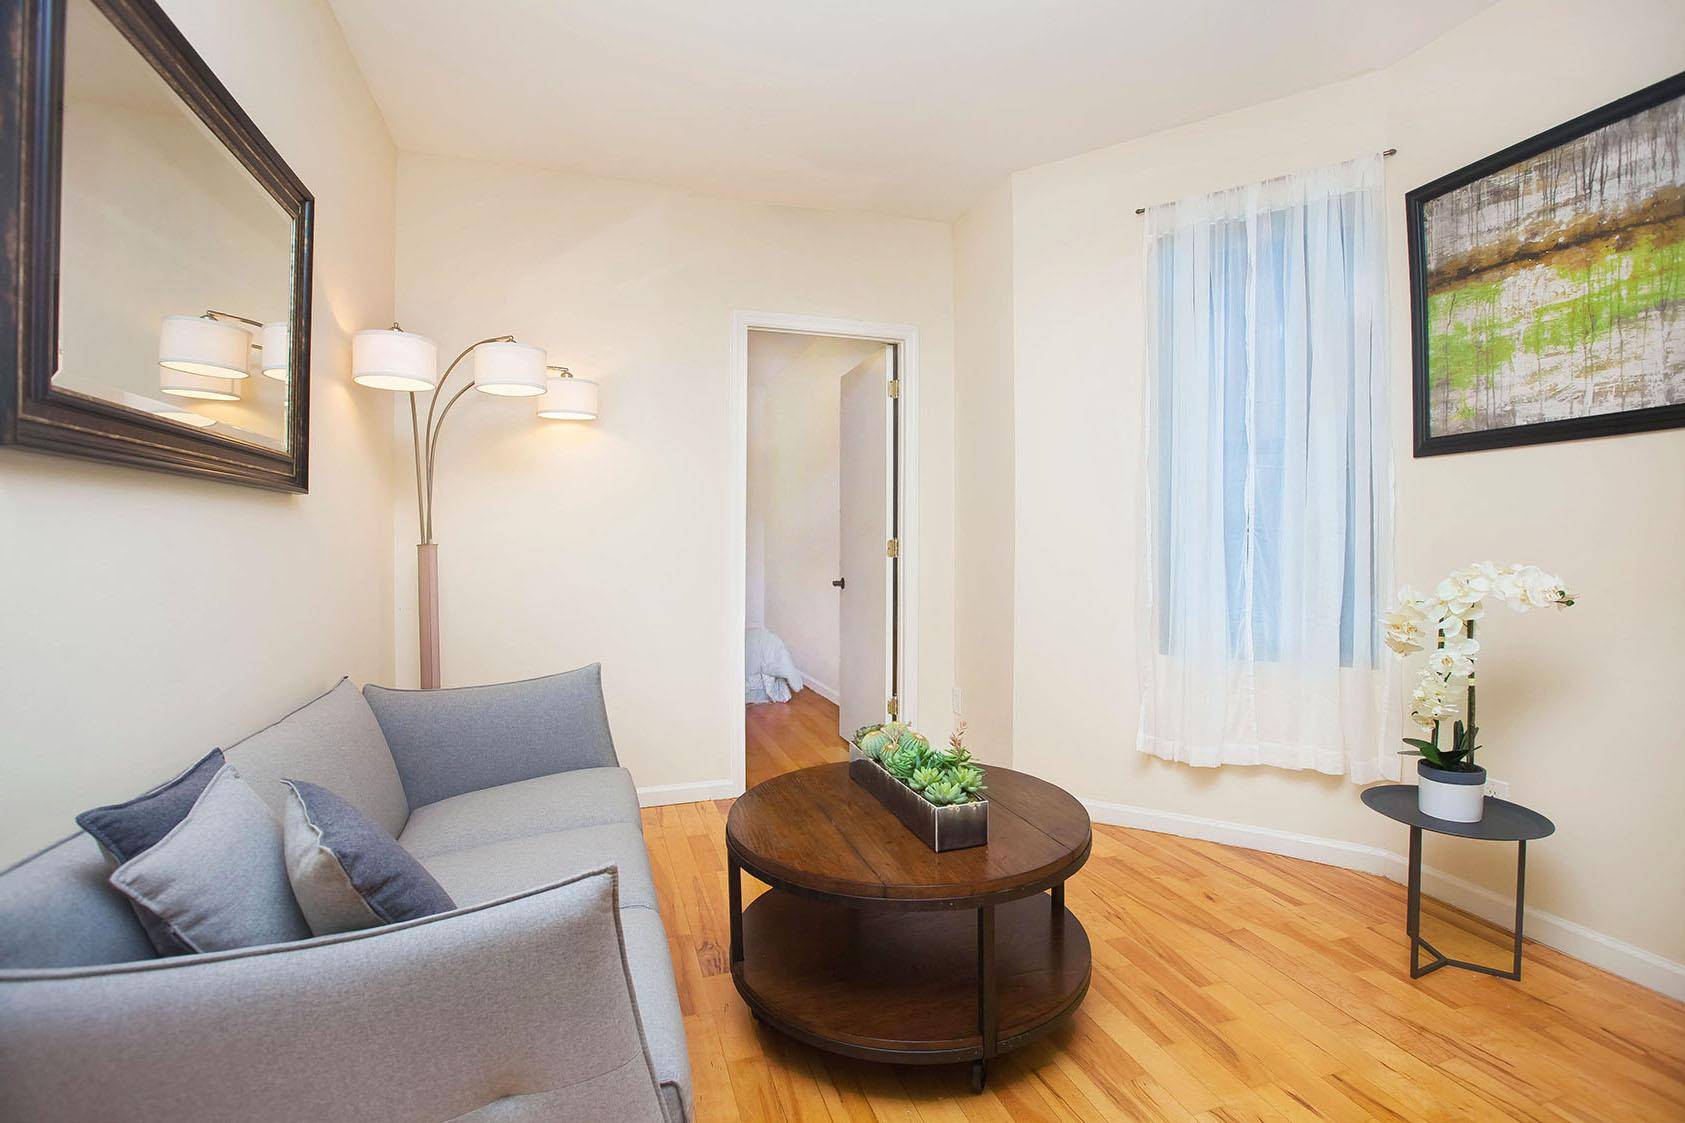 Located in the heart of South Harlem, this great condition 1 bedroom Condo is located 3 short blocks from Central Park, near the B, C, 2, 3 subway lines and ...